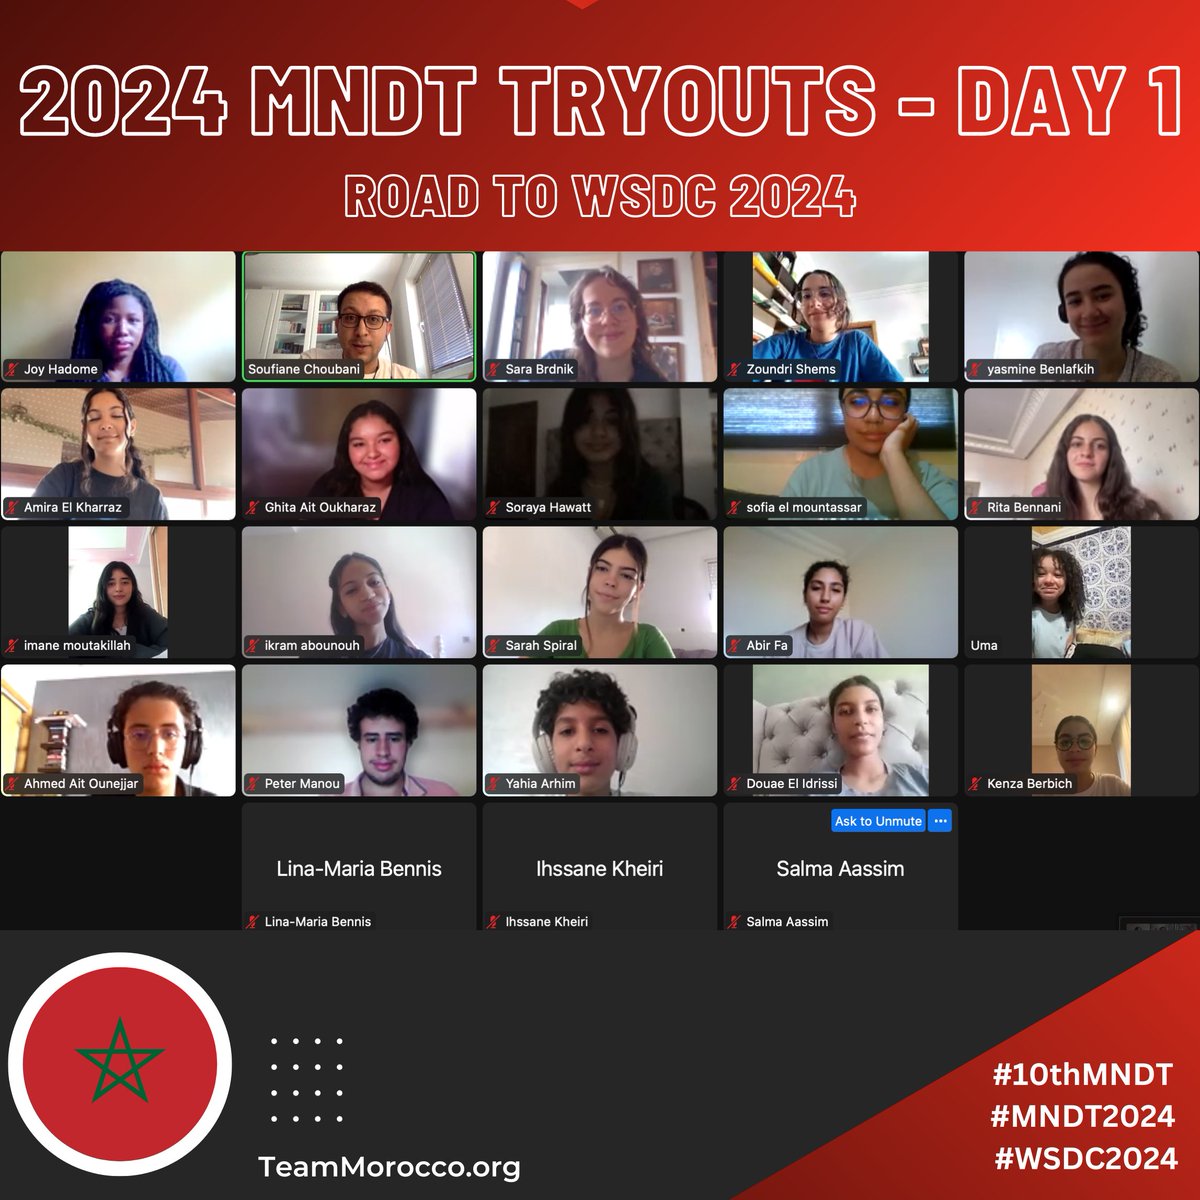 Just completed the first day of the 2024 MNDT trails with students from all over Morocco! We really enjoyed meeting you all and hope you’re all feeling excited and motivated to represent the 10th MNDT at the 2024 WSDC in Serbia!

#Road2WSDC2024 #WSDC2024 #WSDC2024